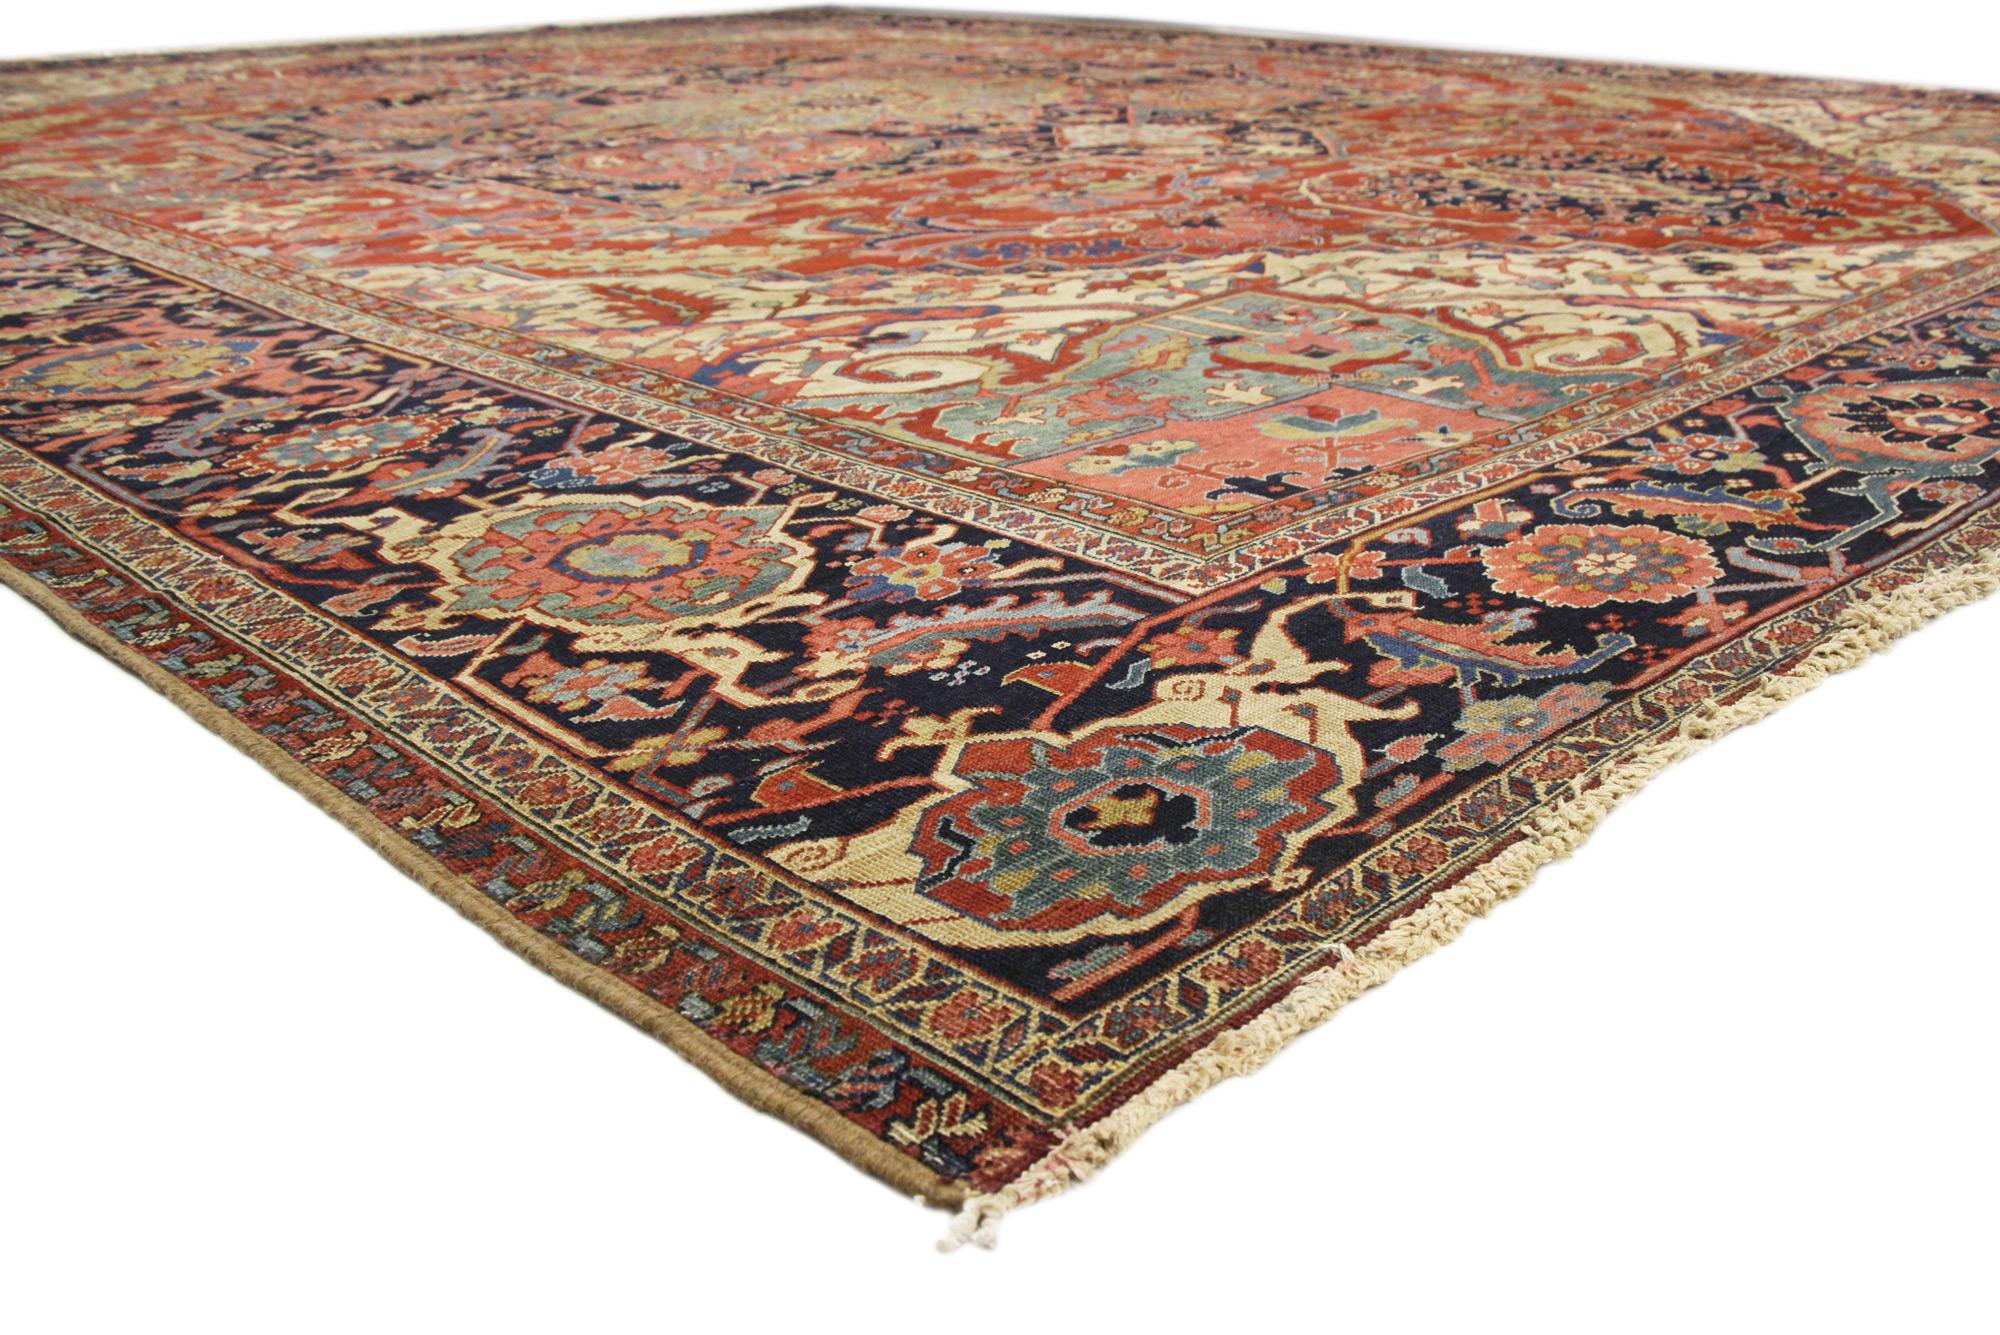 74044 Oversized Antique Persian Serapi Rug 16'04 x 22'05. 
Emanating ​effortless beauty and timeless appeal, this hand knotted wool antique Persian Serapi rug can beautifully blend modern, contemporary, and traditional interiors. Taking center stage